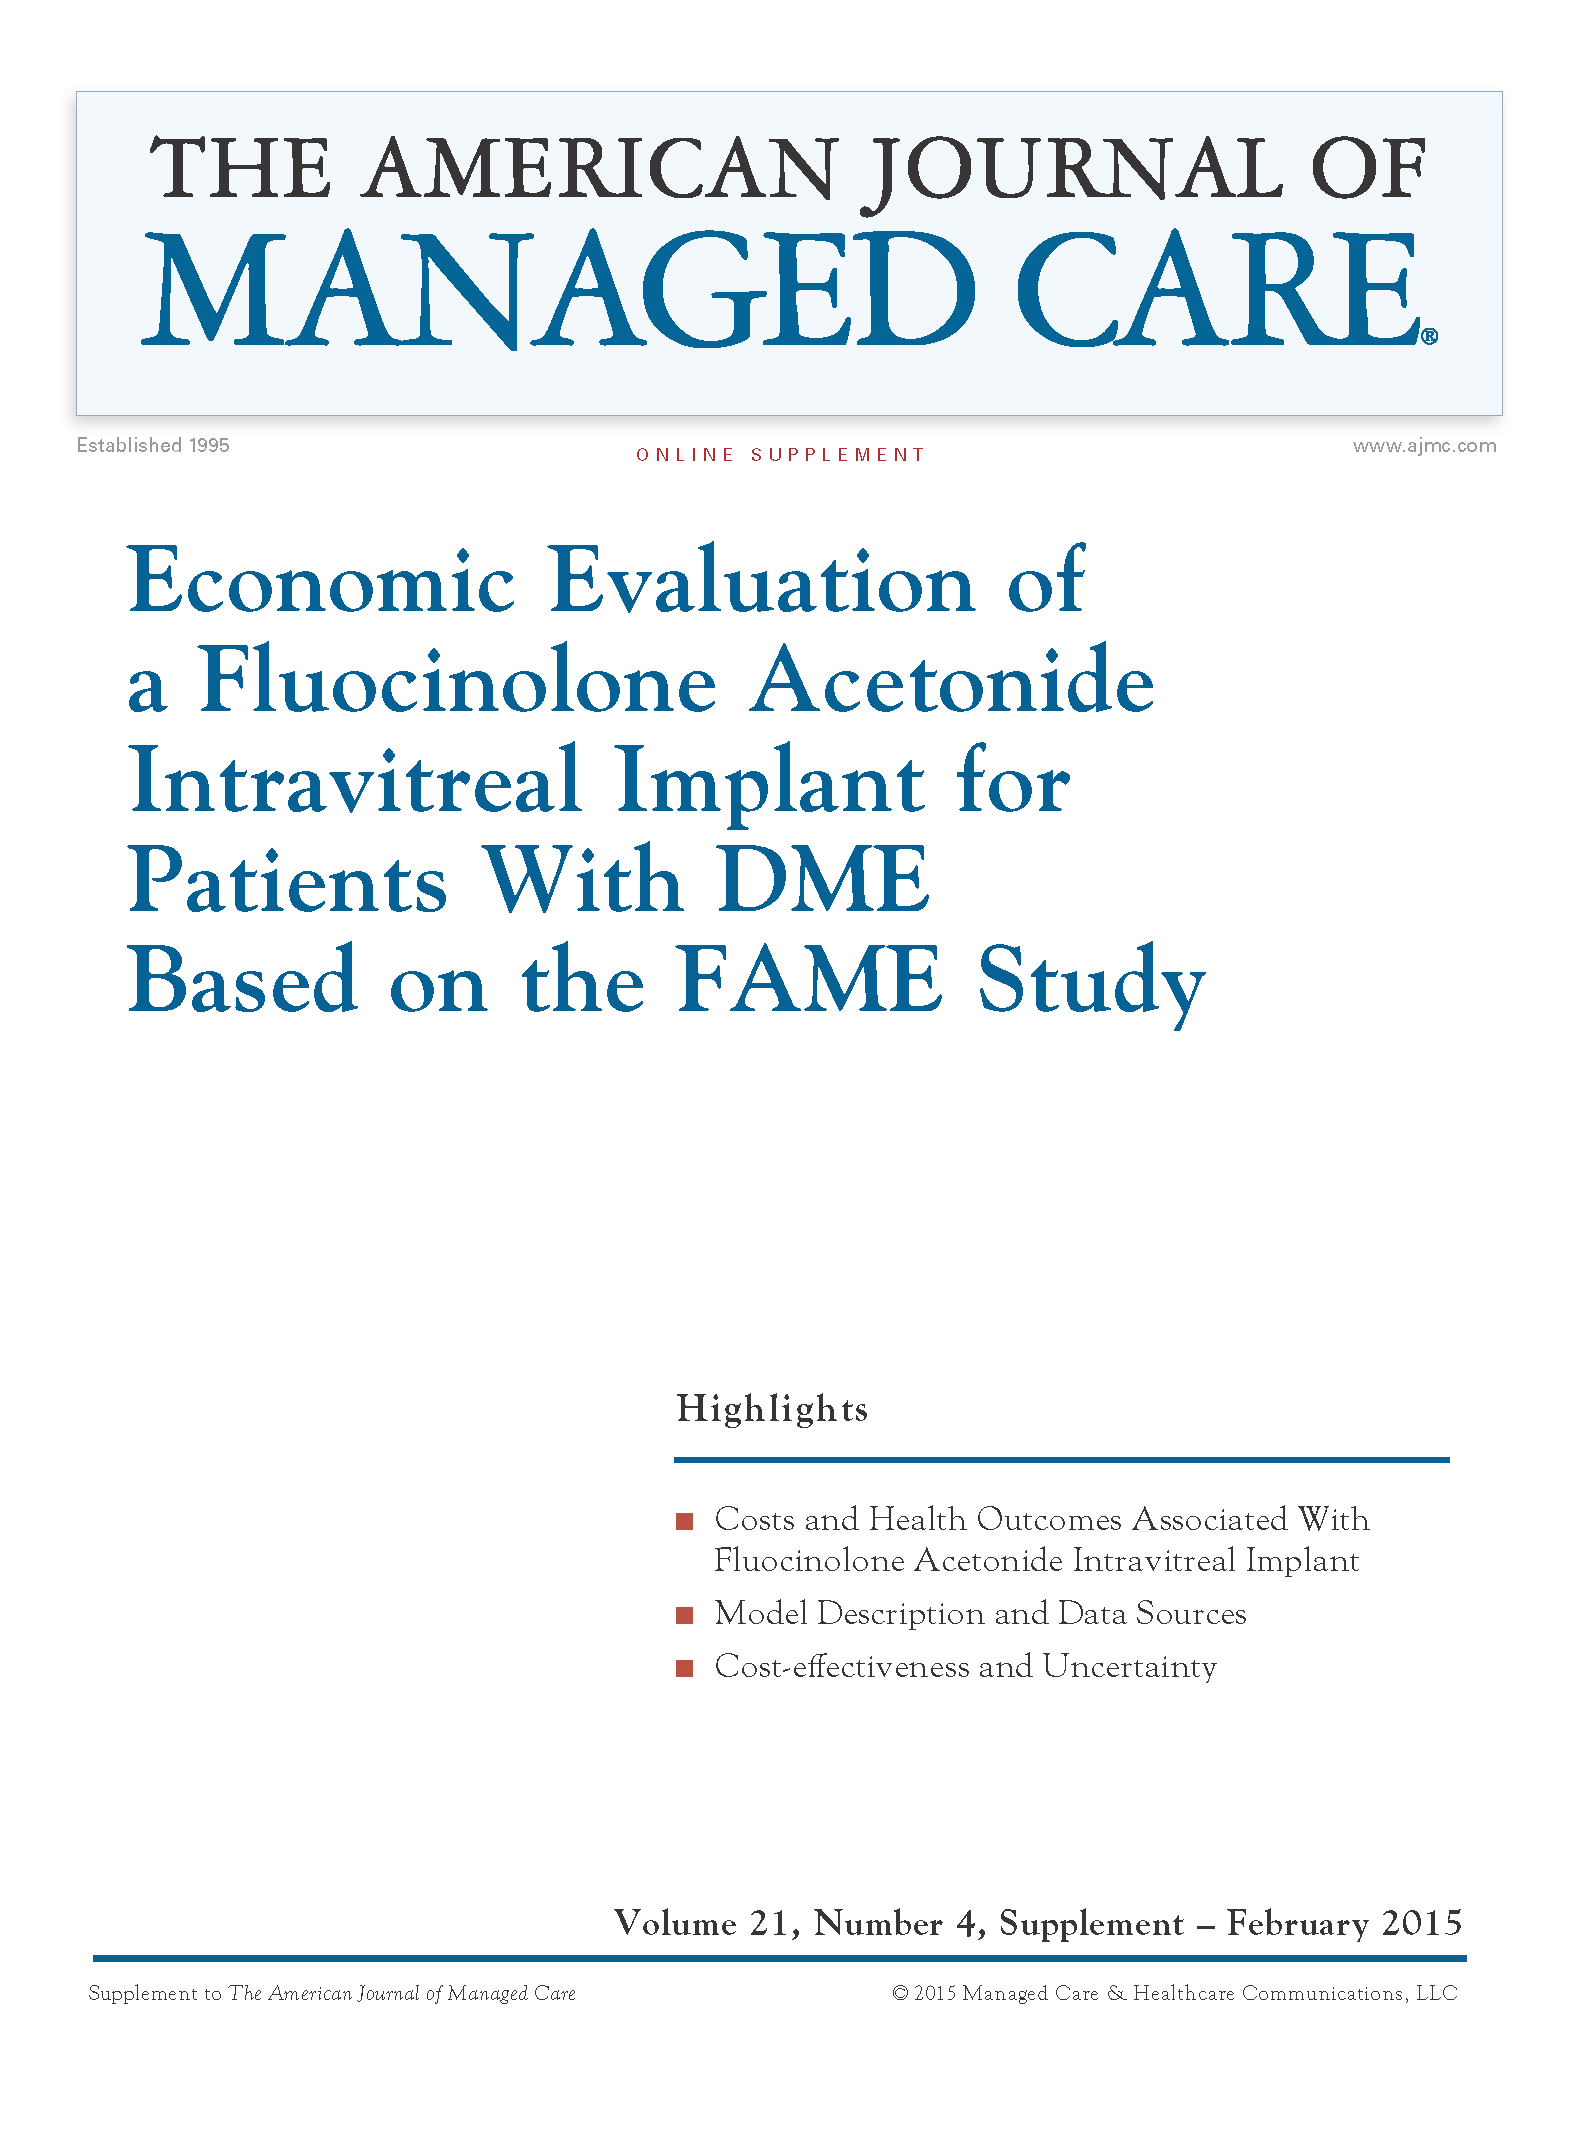 Economic Evaluation of a Fluocinolone Acetonide Intravitreal Implant for Patients With DME Based on 